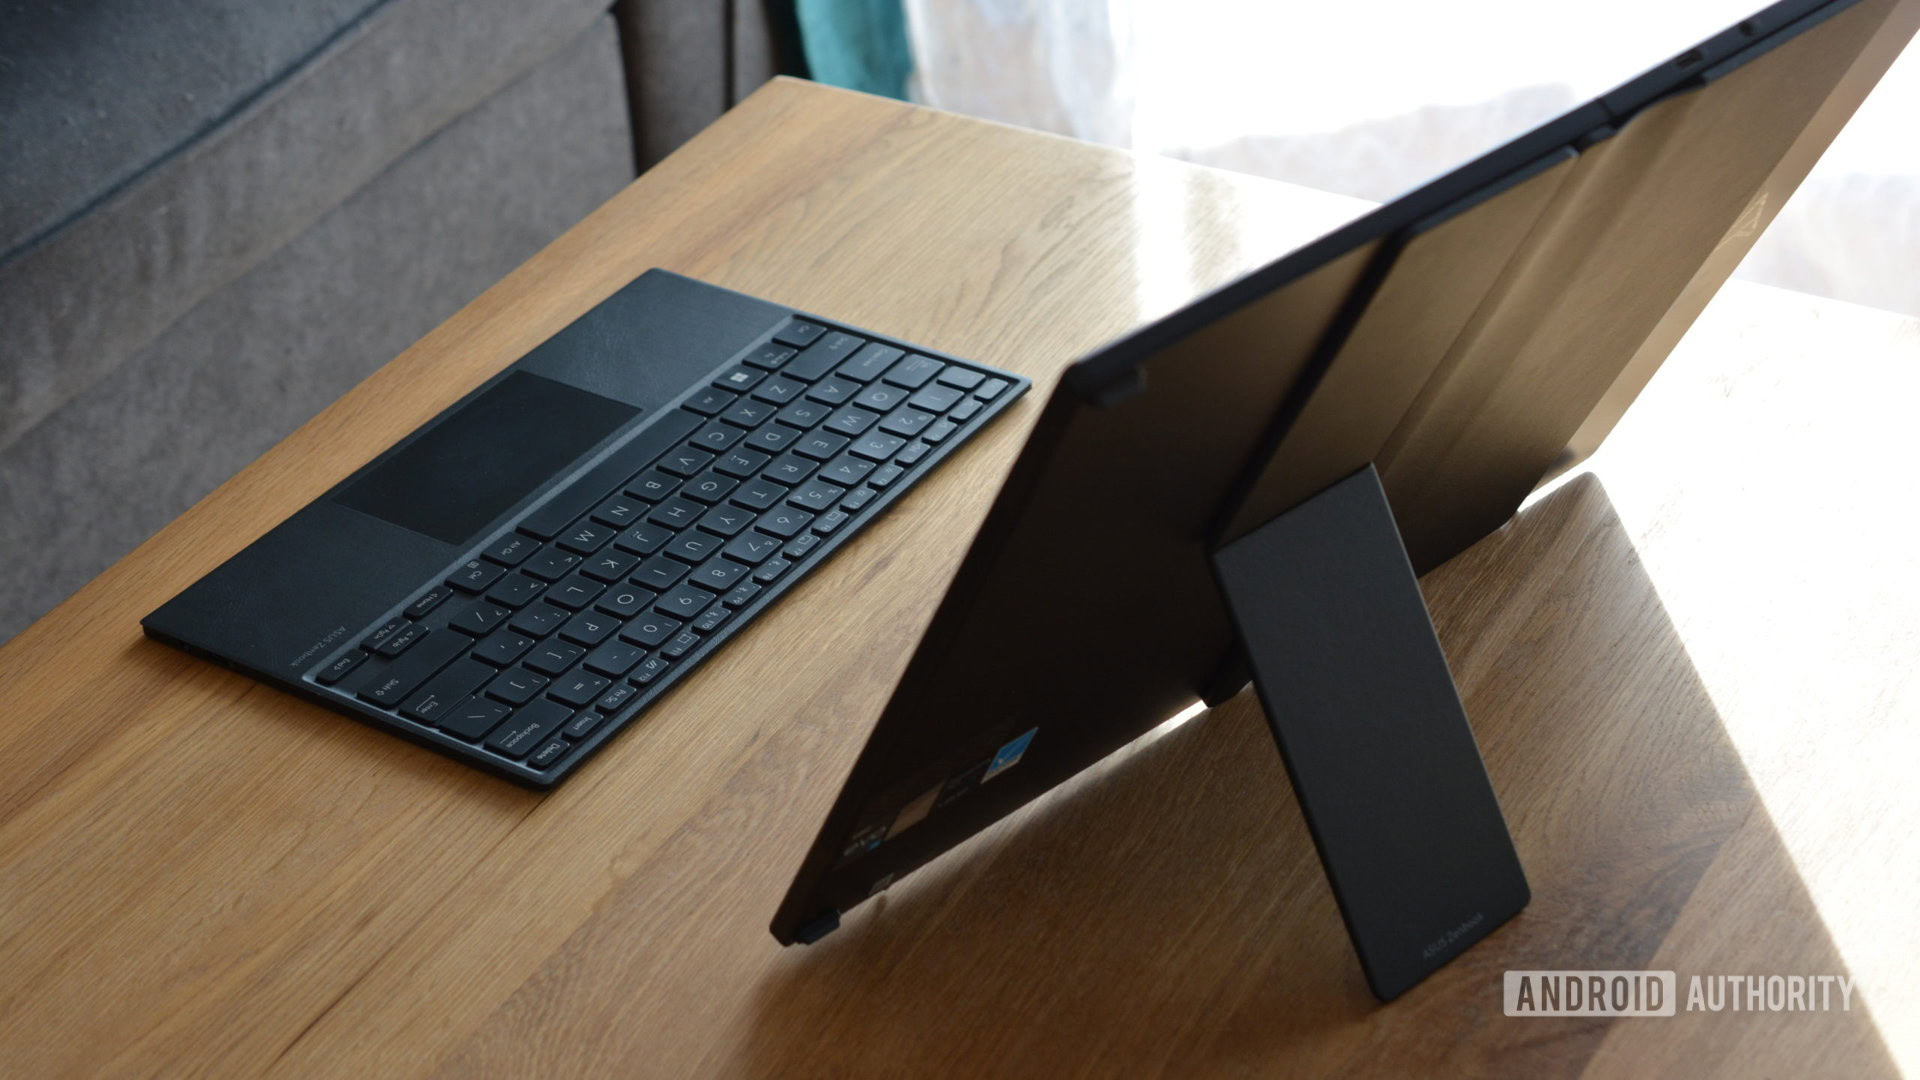 The First Ever Foldable 17-Inch Laptop Is a Stunner